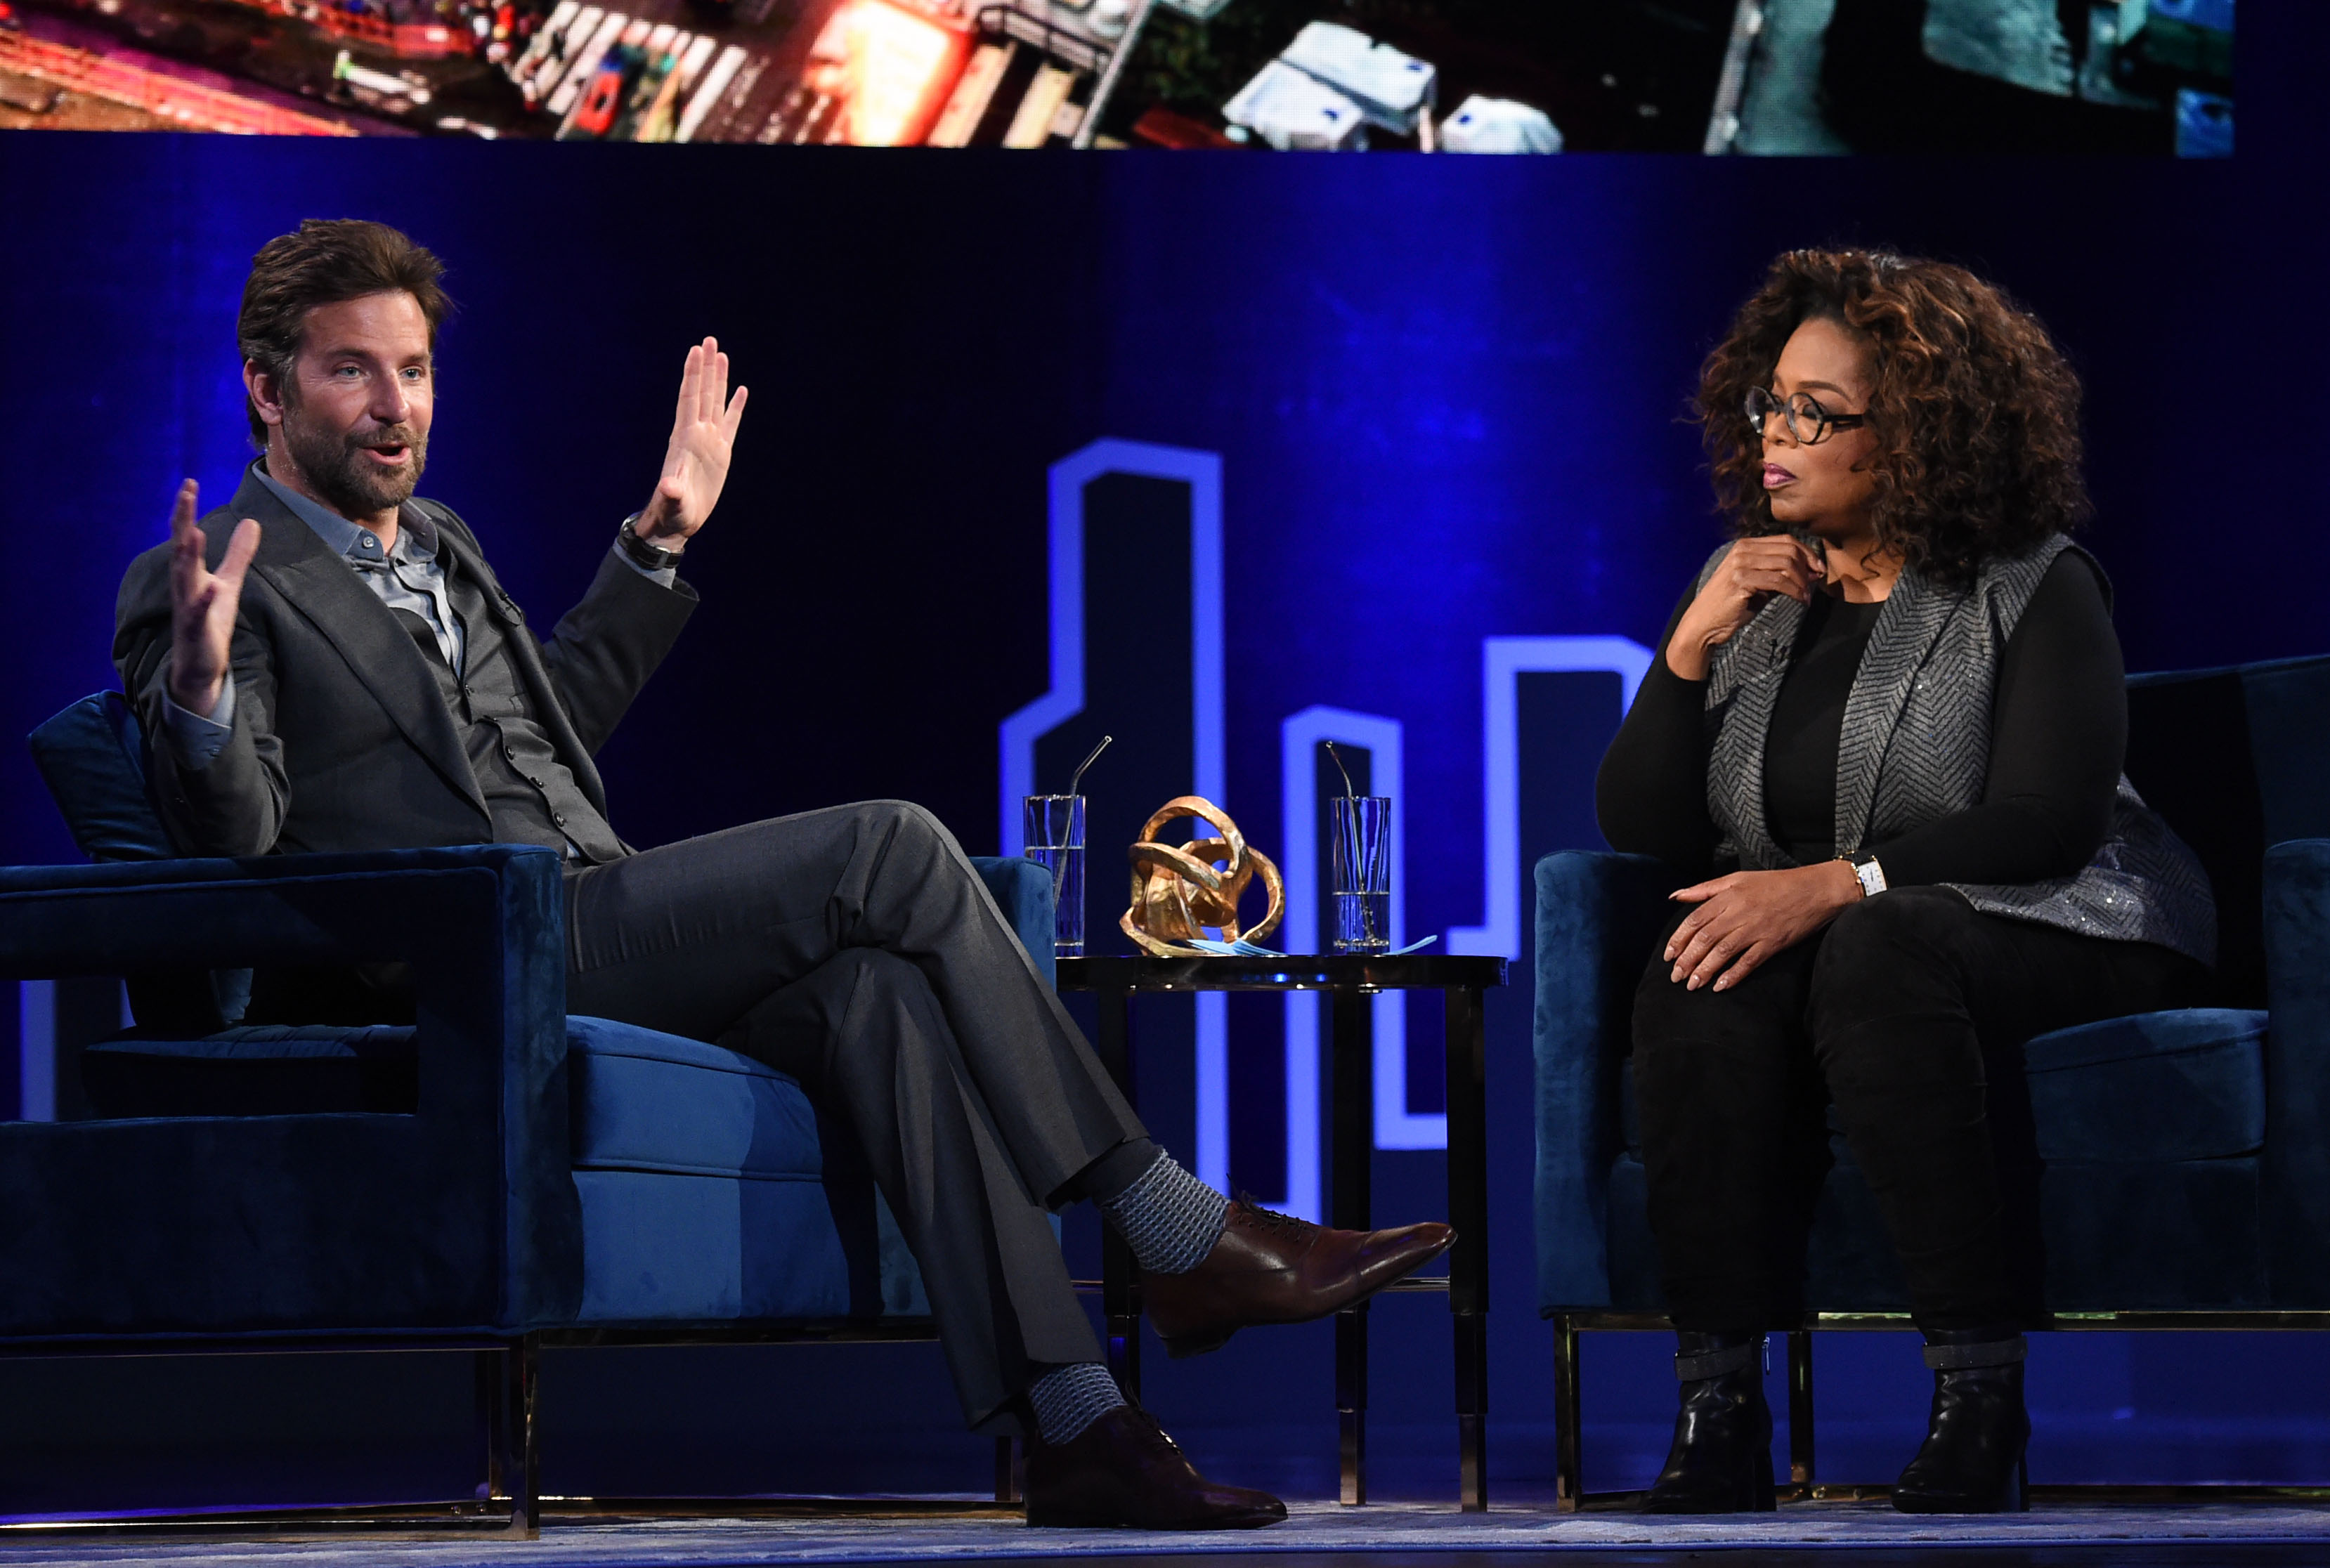 NEW YORK, NEW YORK - FEBRUARY 05: Bradley Cooper and Oprah Winfrey attend Oprah&#039;s SuperSoul Conversations at PlayStation Theater on February 05, 2019 in New York City. (Photo by Jamie McCarthy/Getty Images)